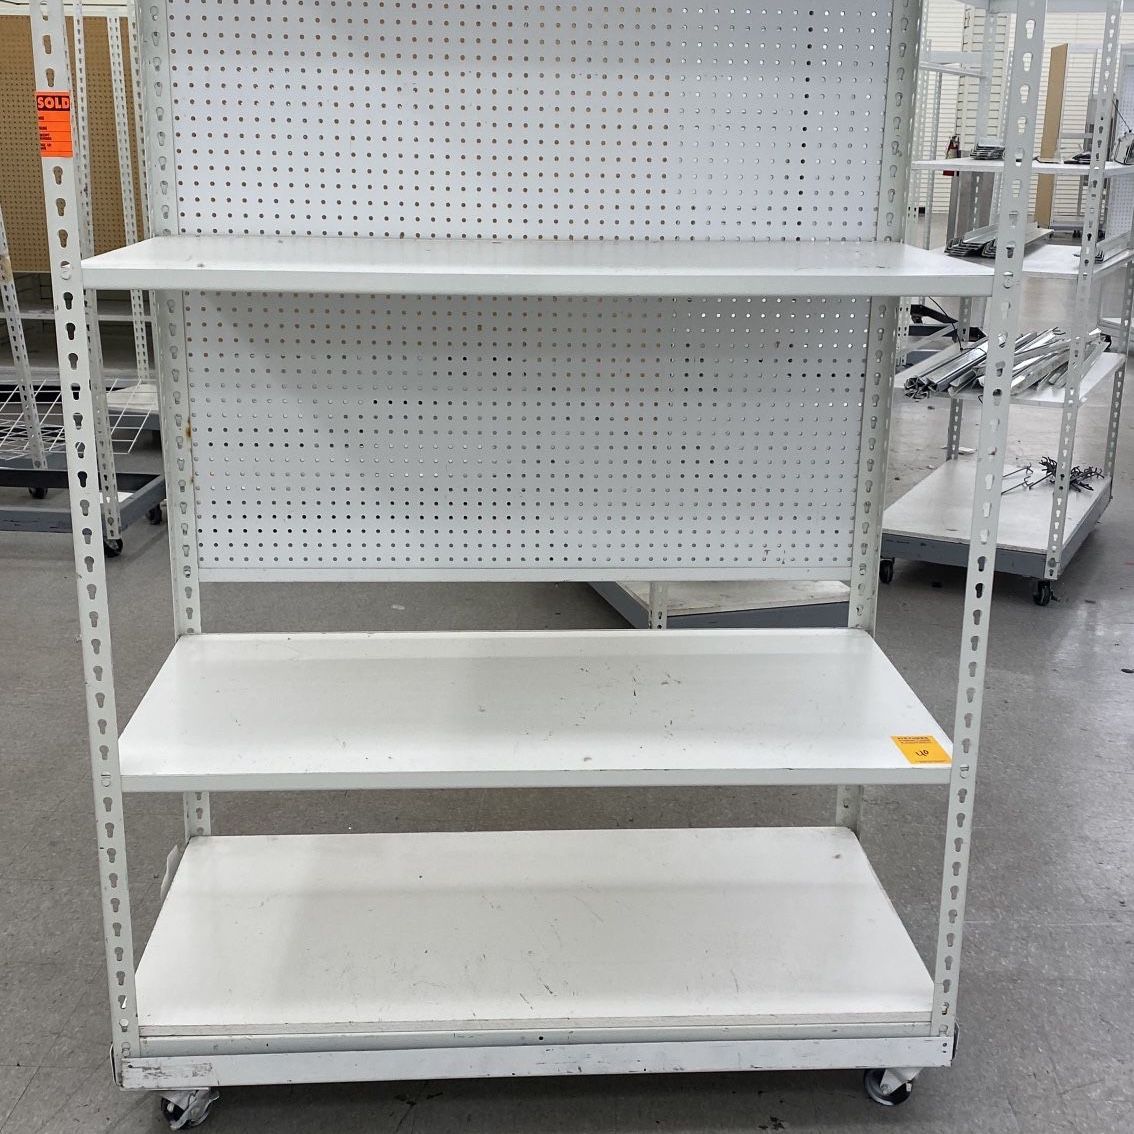 Rolling Wide Span Storage Shelving, 4-6 Adjustable Shelves & Pegboard (76”H x 48”W x 25”D) - Delivery